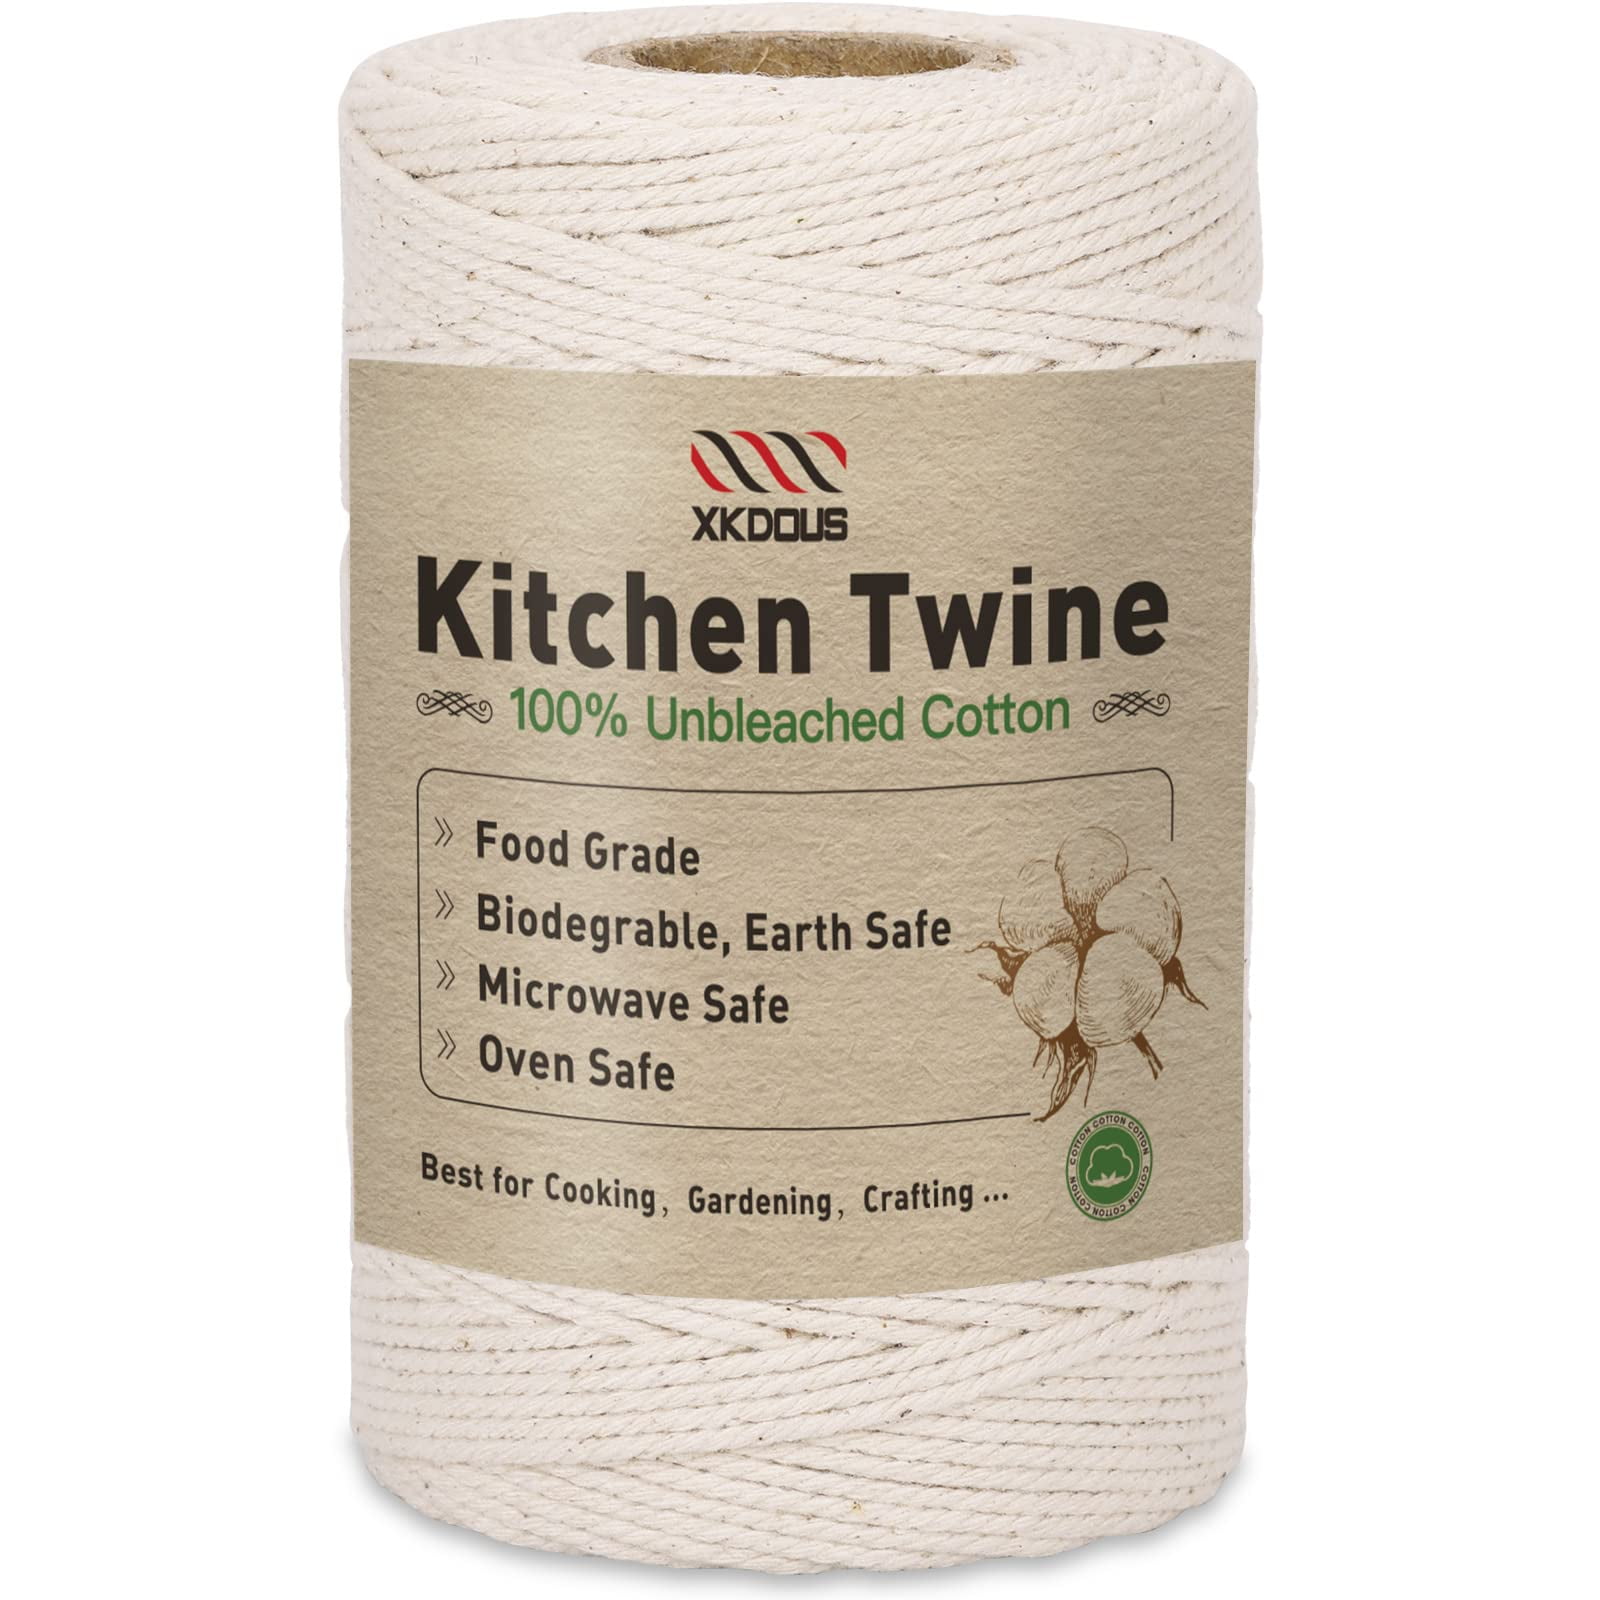 426 Feet Tarred Twine #36 Bank Line-Green Nylon String 2mm-100% Green Nylon  Twine-Strong Durable Twisted Seine Twine for Garden,Fishing,Outdoor  Camping&Netting Home Improvement,Weatherproof 